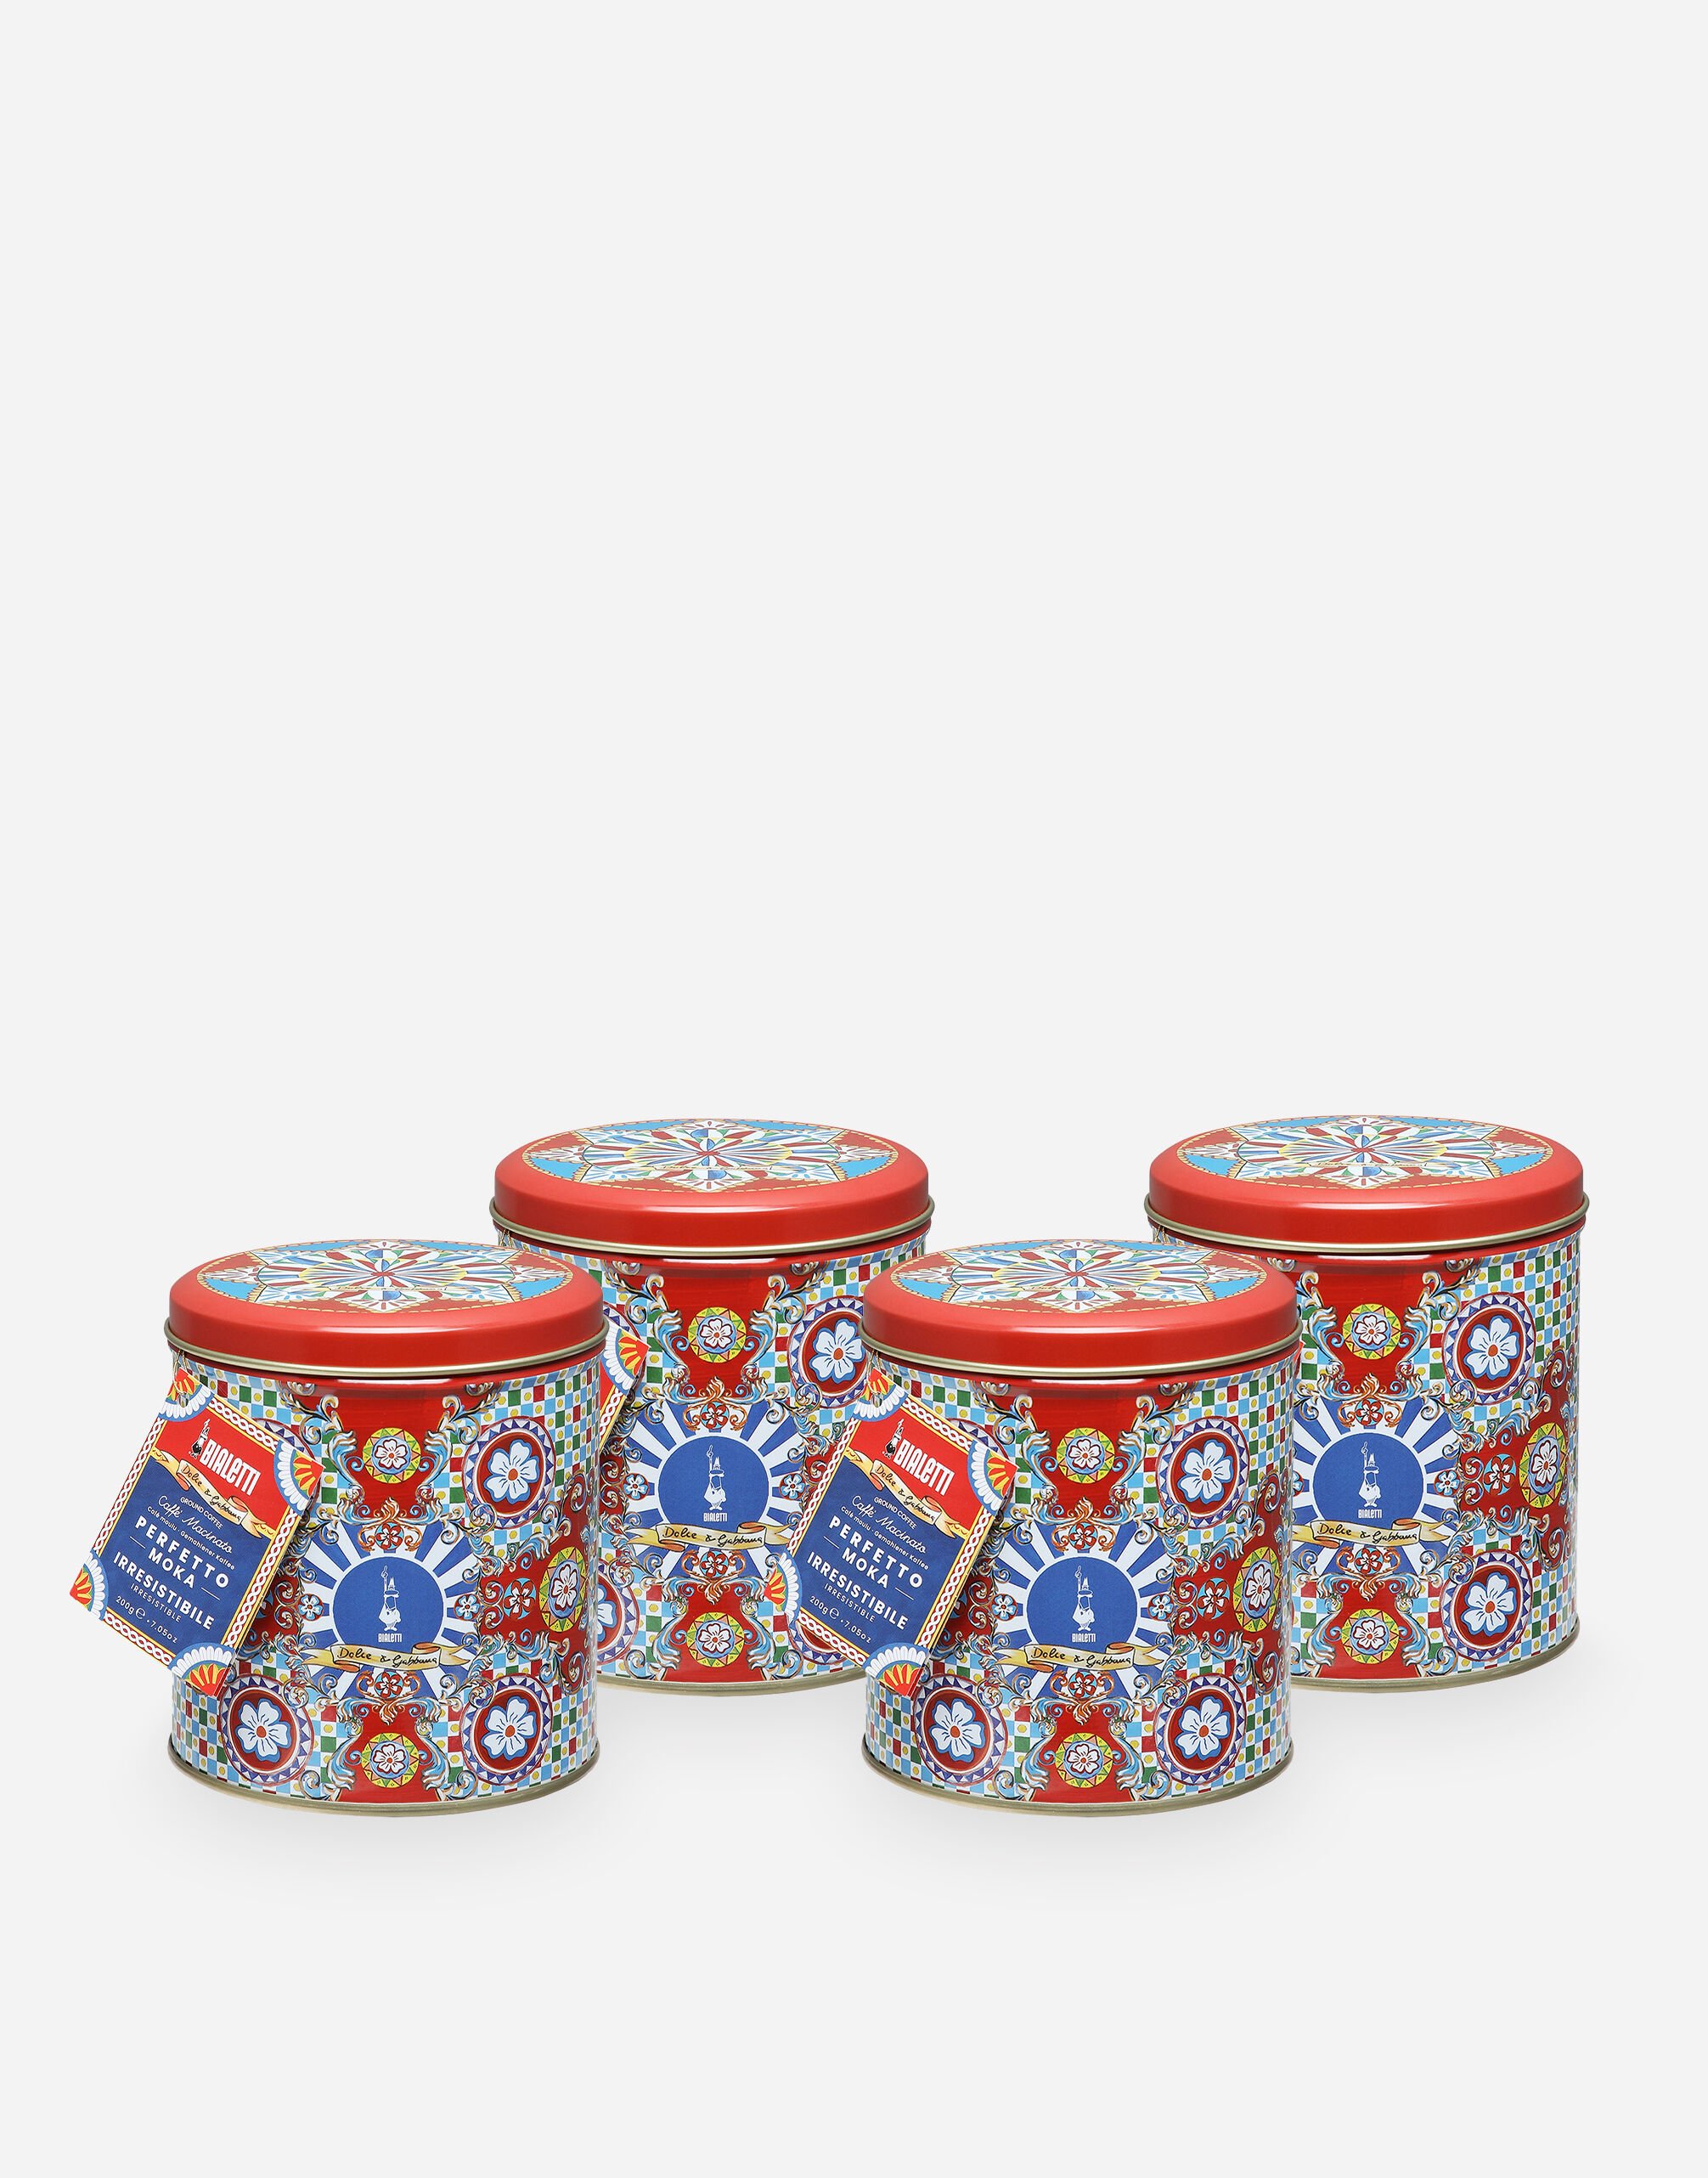 Dolce & Gabbana 4 Coffee Canisters BIALETTI DOLCE&GABBANA Multicolor TCCE15TCAEF